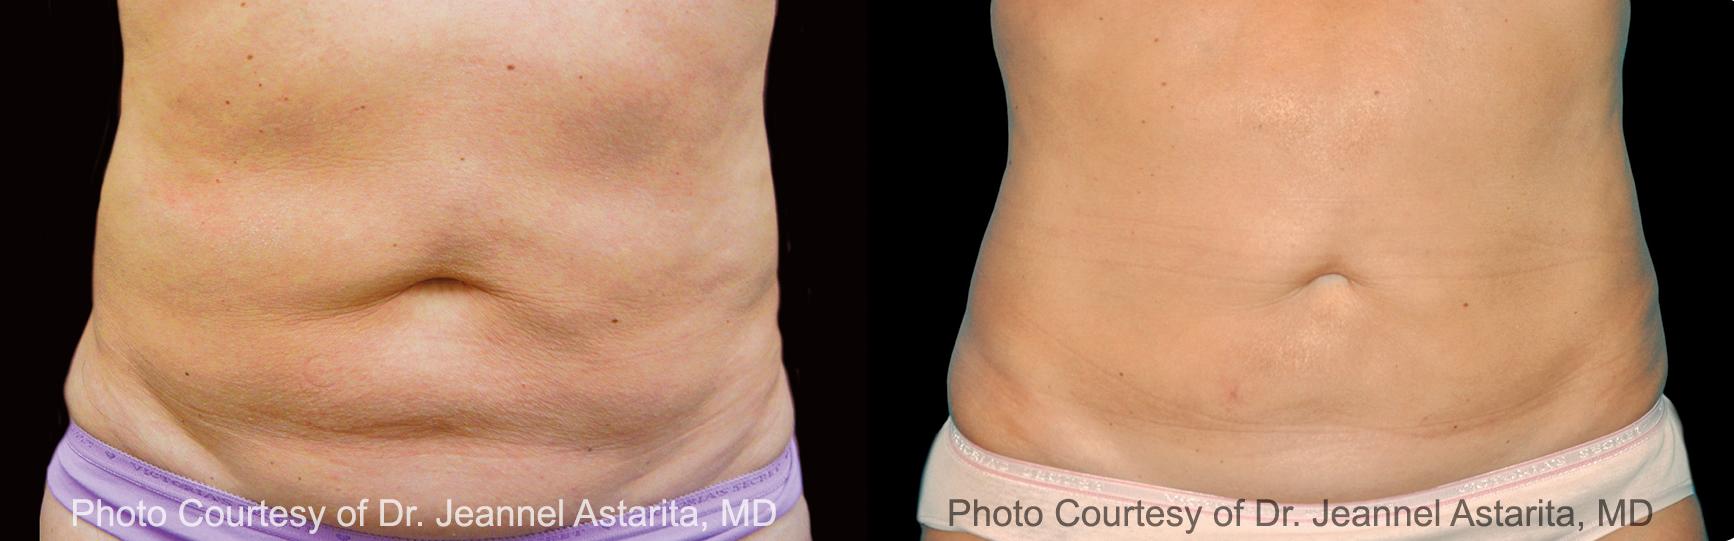  before and after pictures in , , What Happens to Frozen Fat During CoolSculpting?